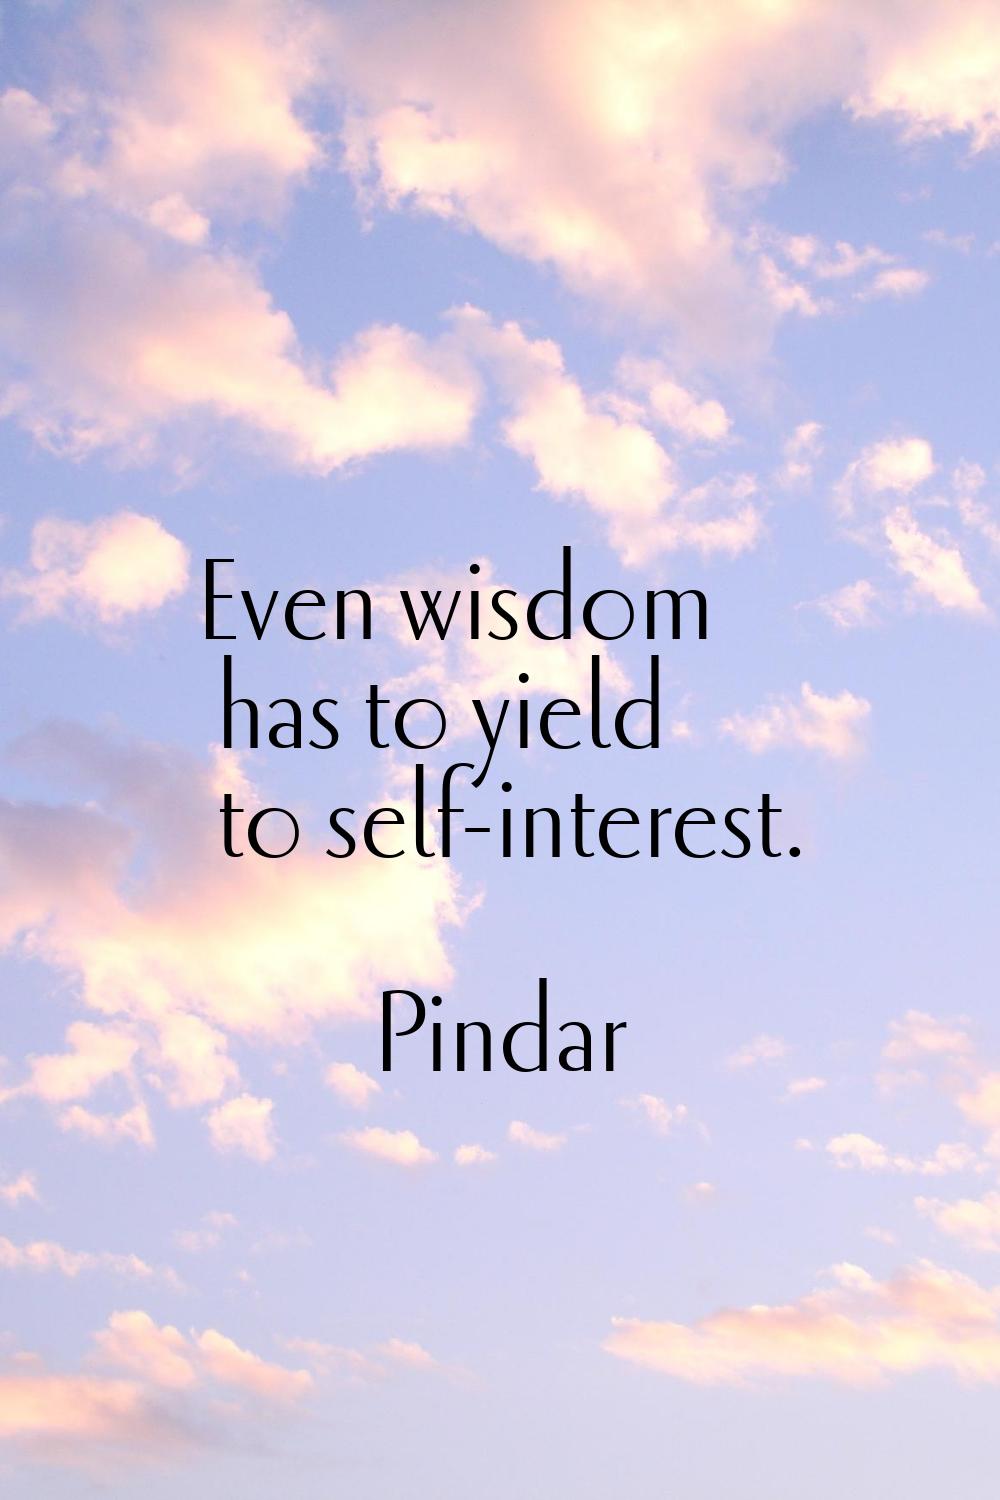 Even wisdom has to yield to self-interest.